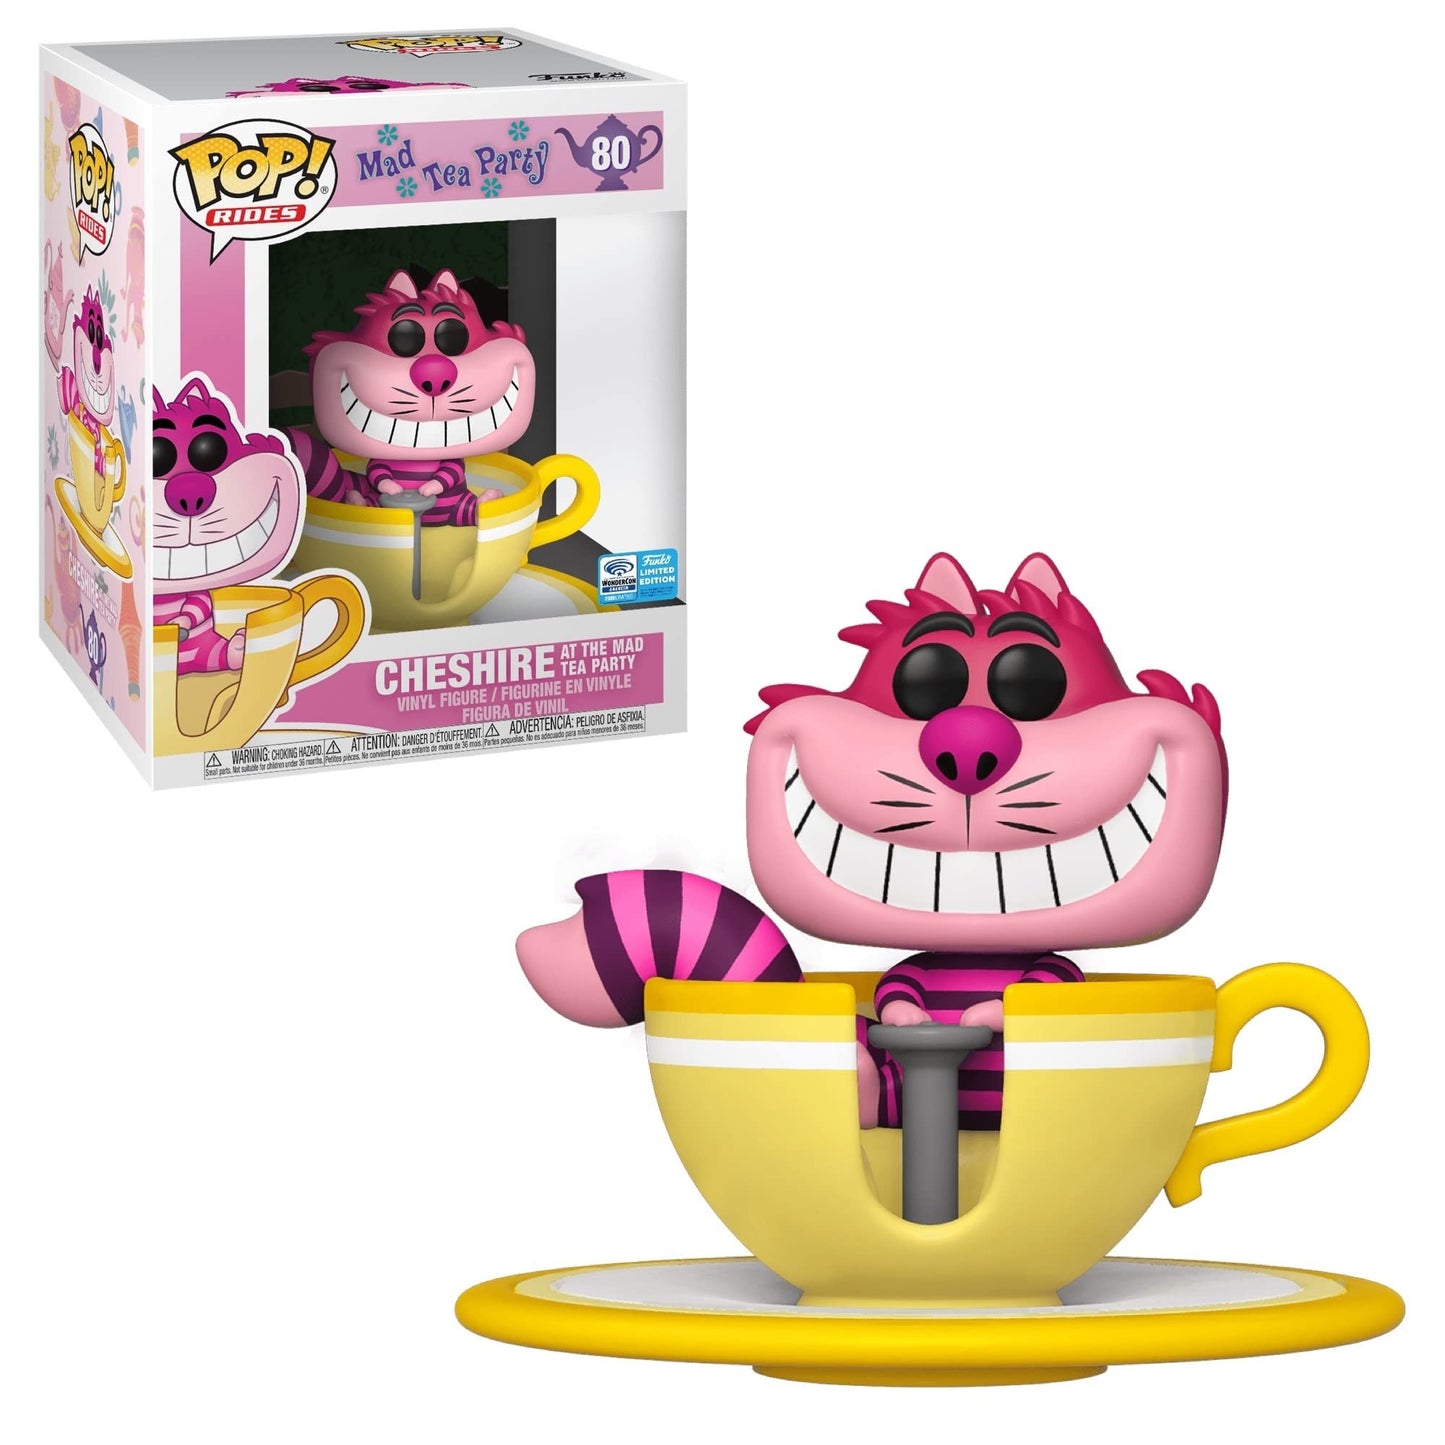 Funko POP! Rides Alice in Wonderland Mad Tea Party Cheshire at The Mad Tea Party 6"